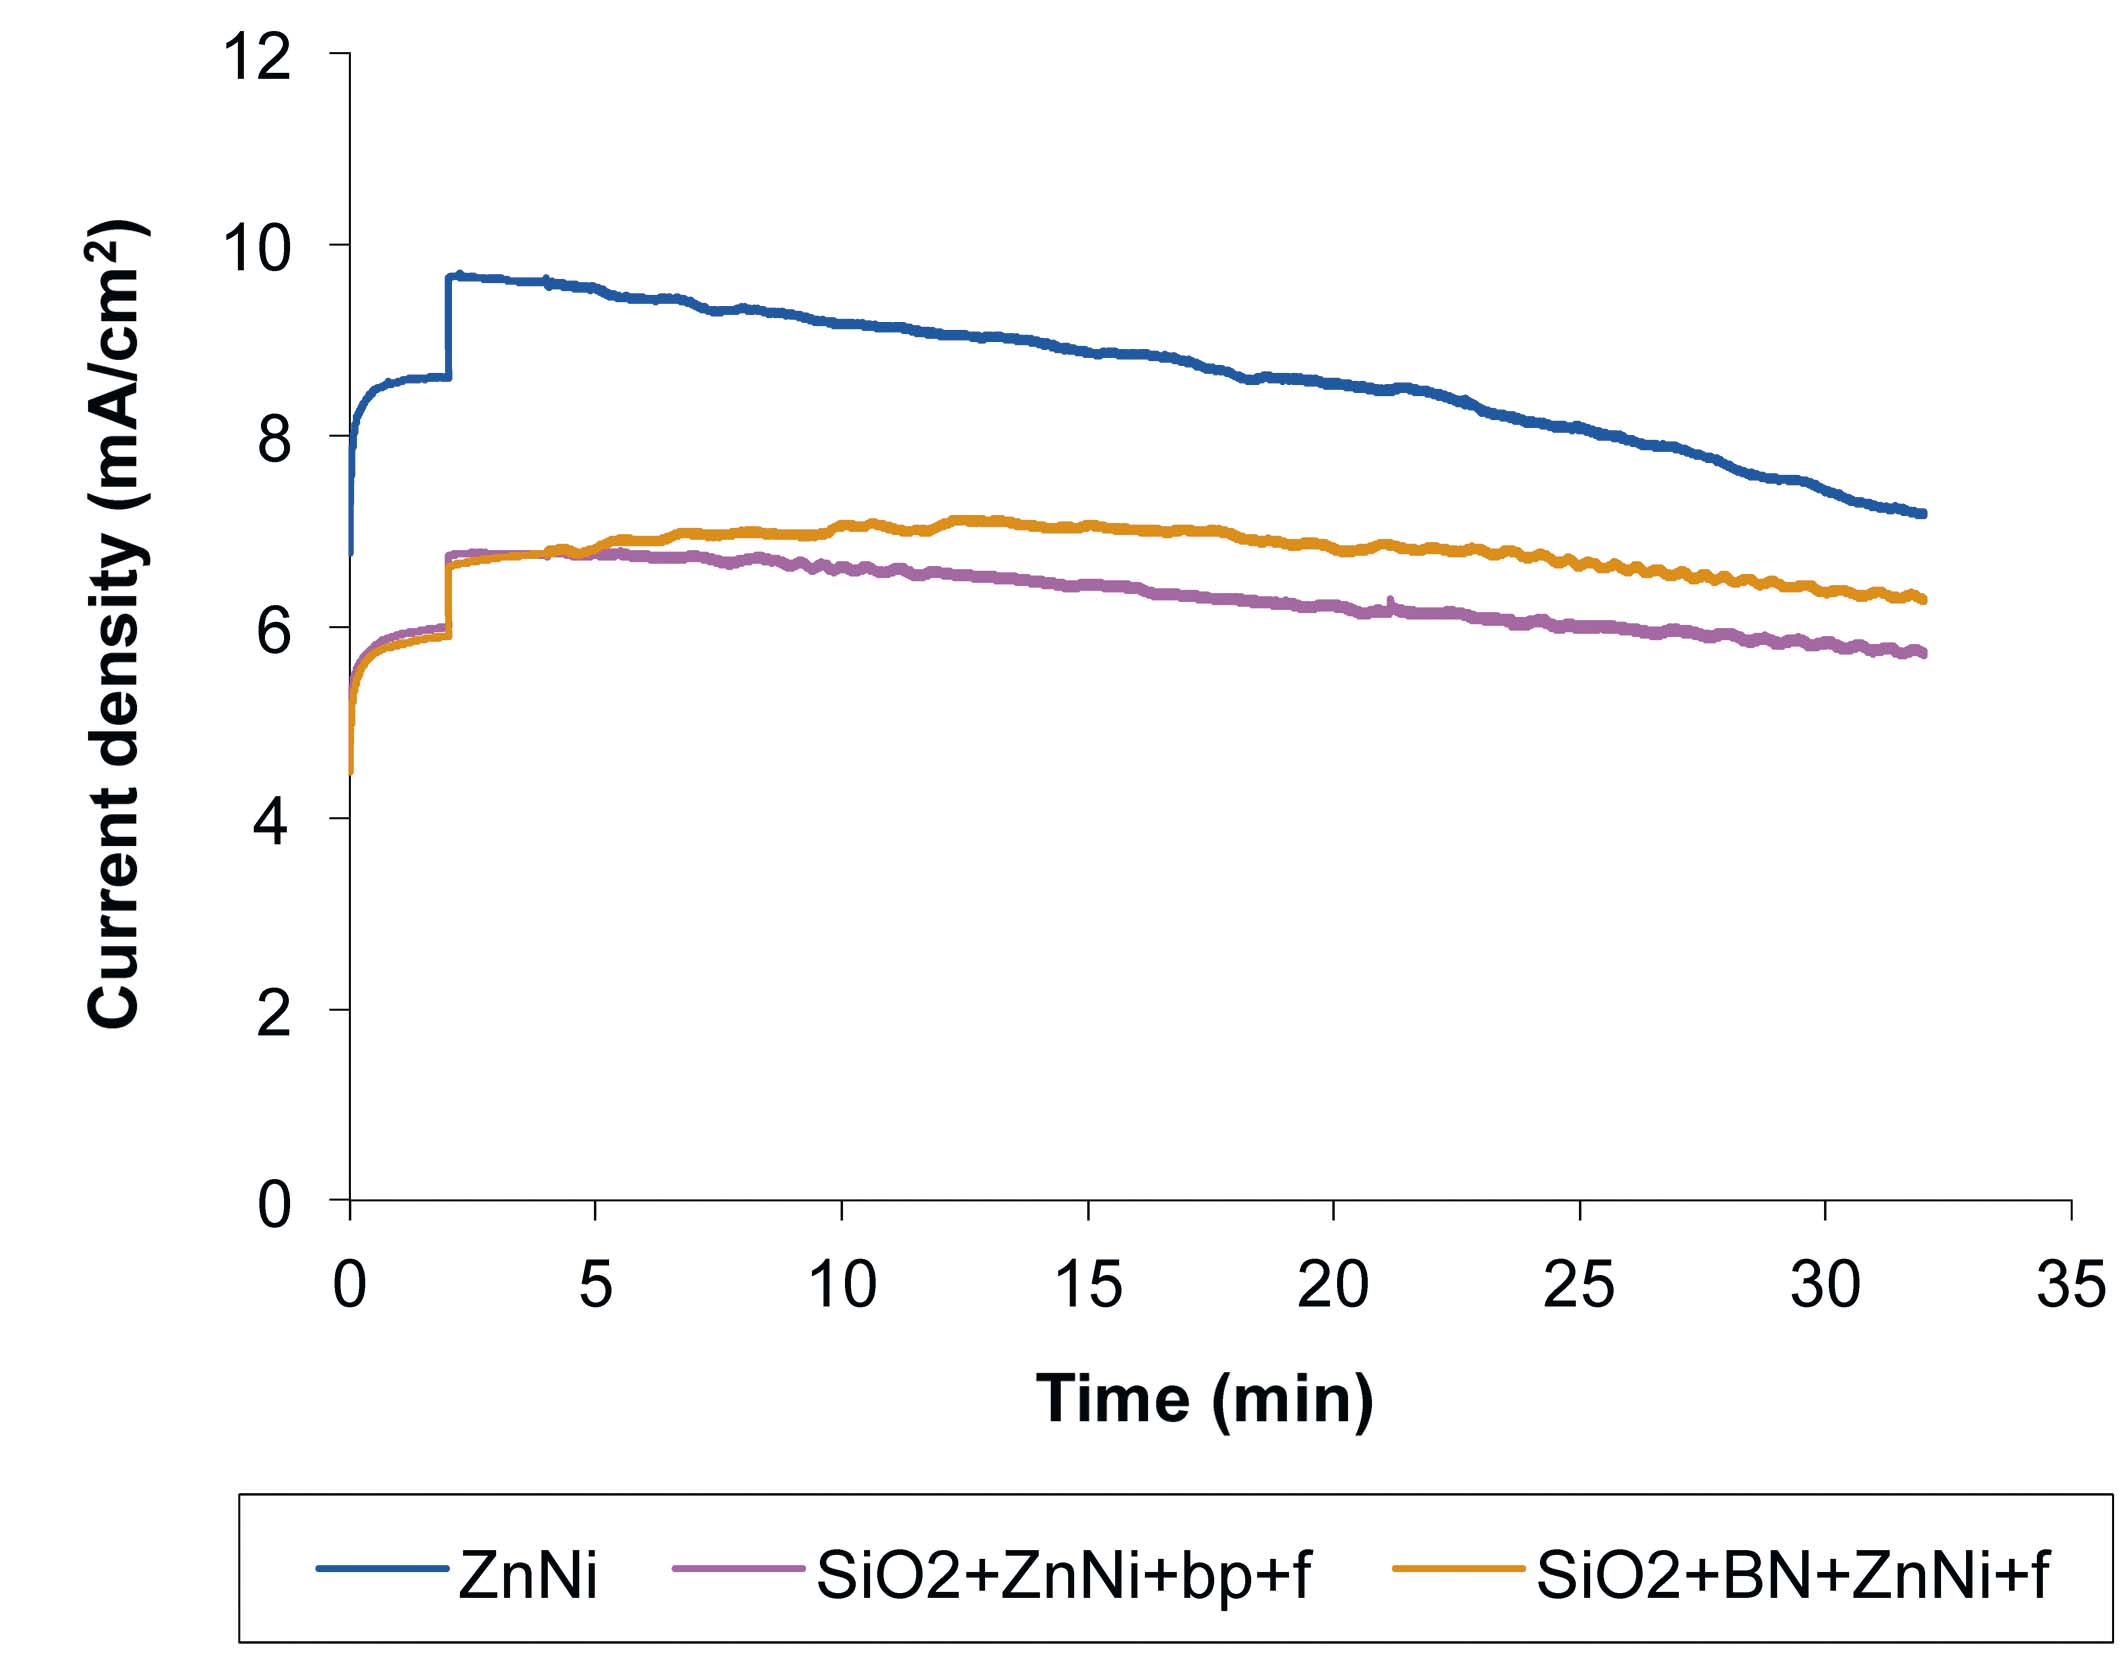 Fig. 9: Current density variation with time, for Zn-Ni, SiO2+Zn-Ni+bp+f and SiO2+BN+Zn-Ni+f samples, during tribocorrosion in 1 % NaCl solution, with the following tribometer parameters: 0.5 Hz, 14 mm, 780 friction cycles and a normal force of 2 N